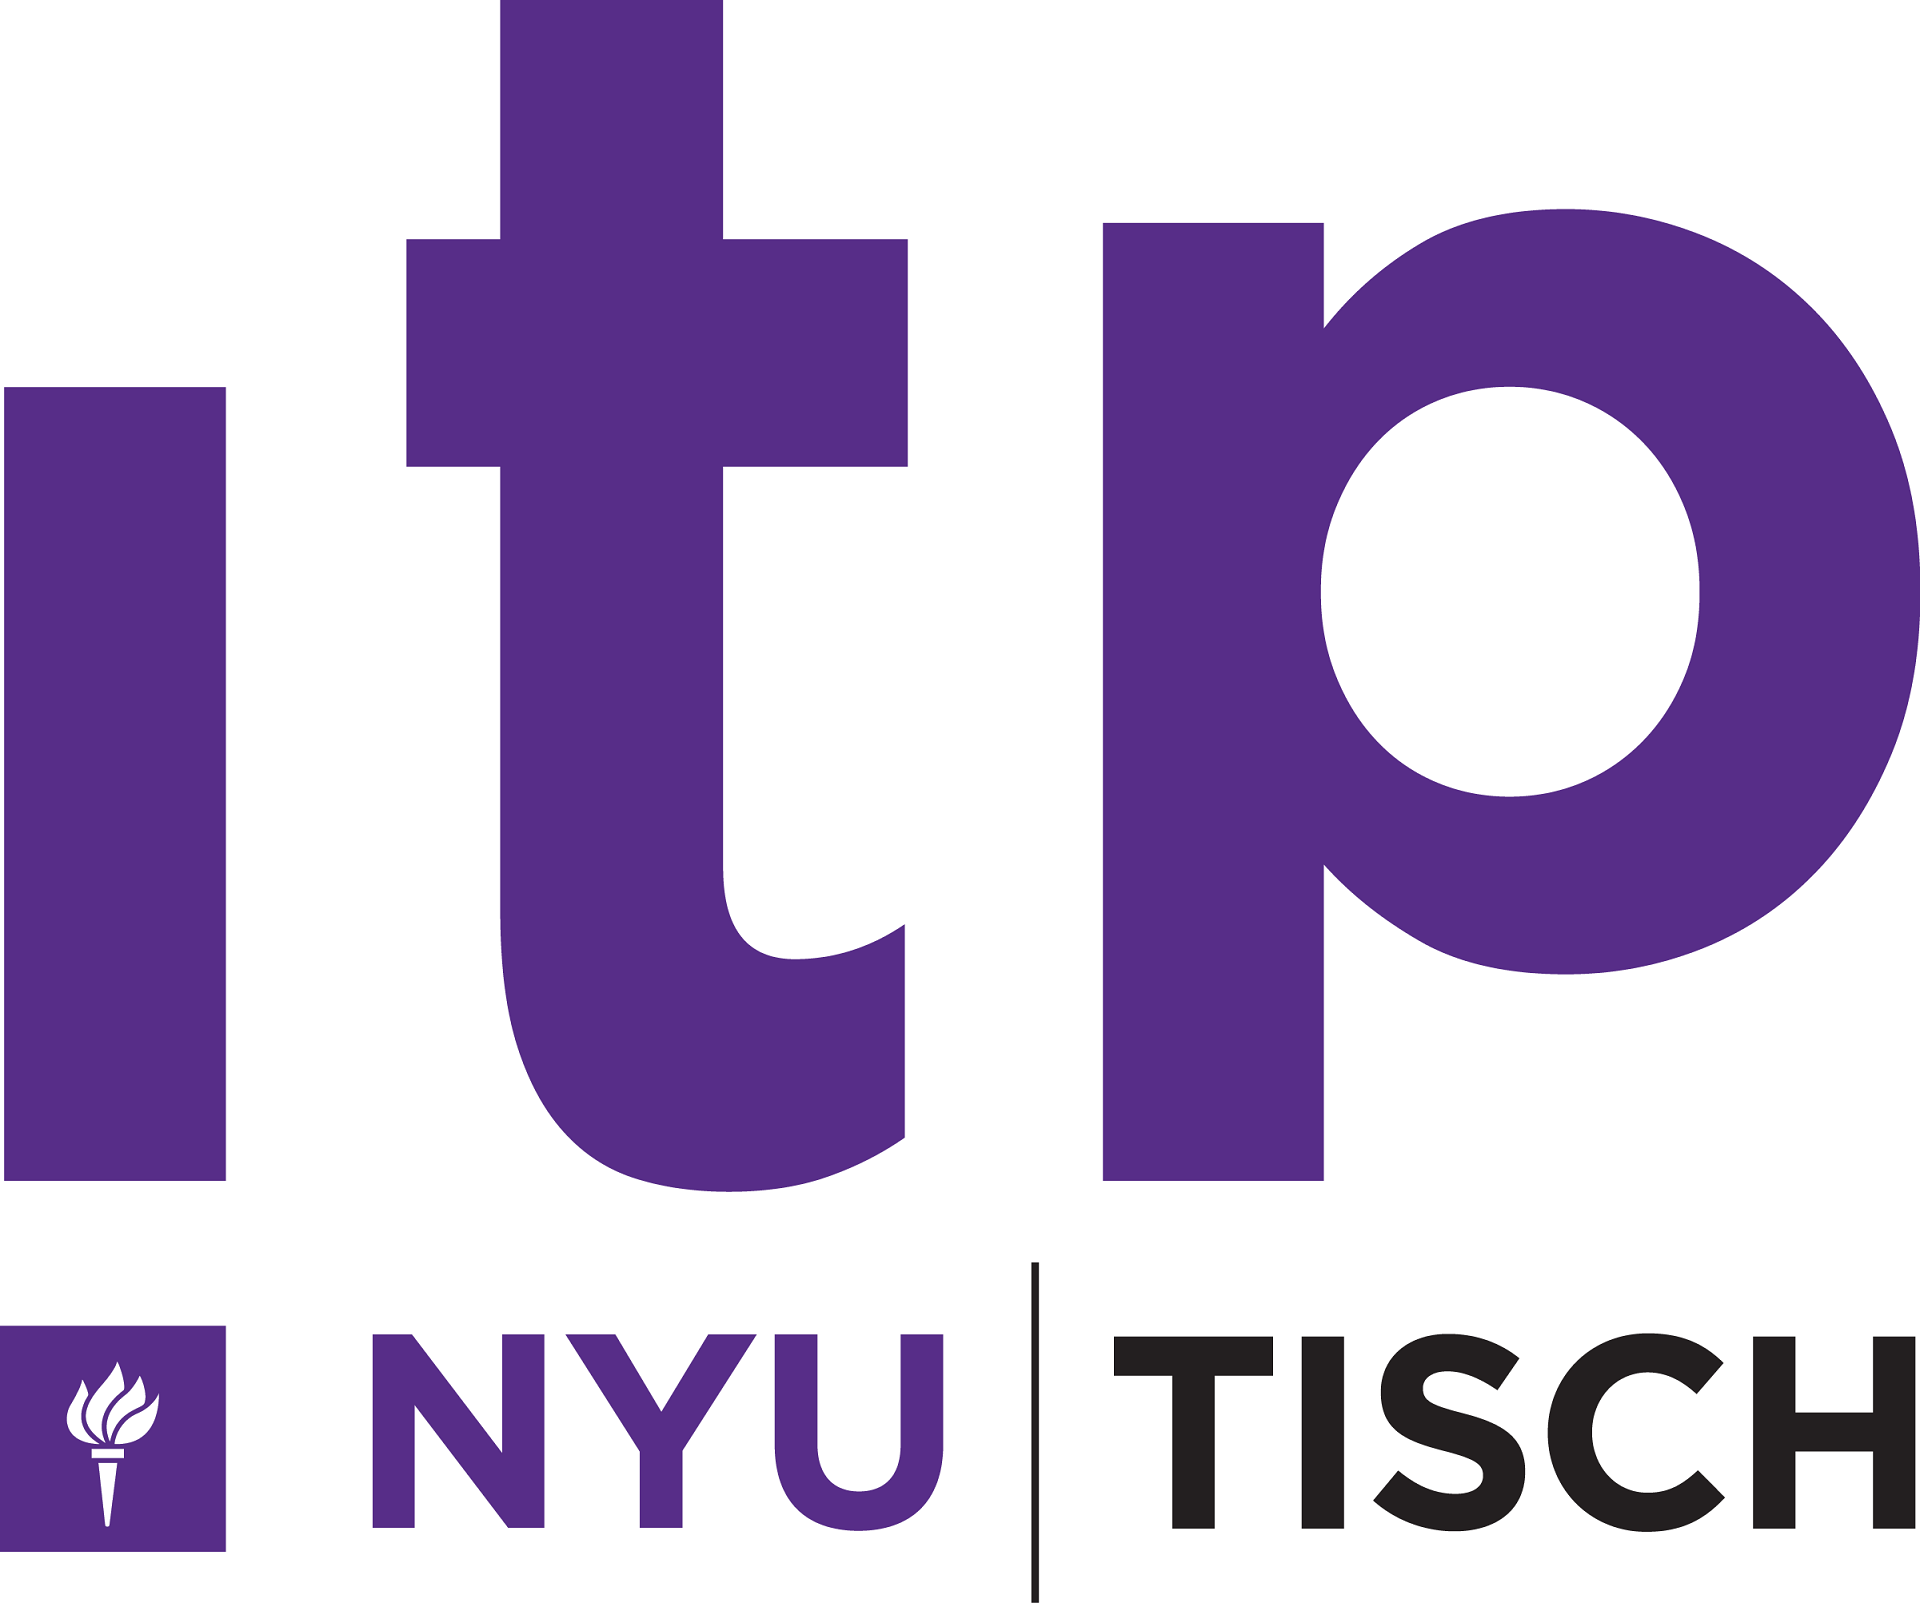 Image of ITP written in purple and black.